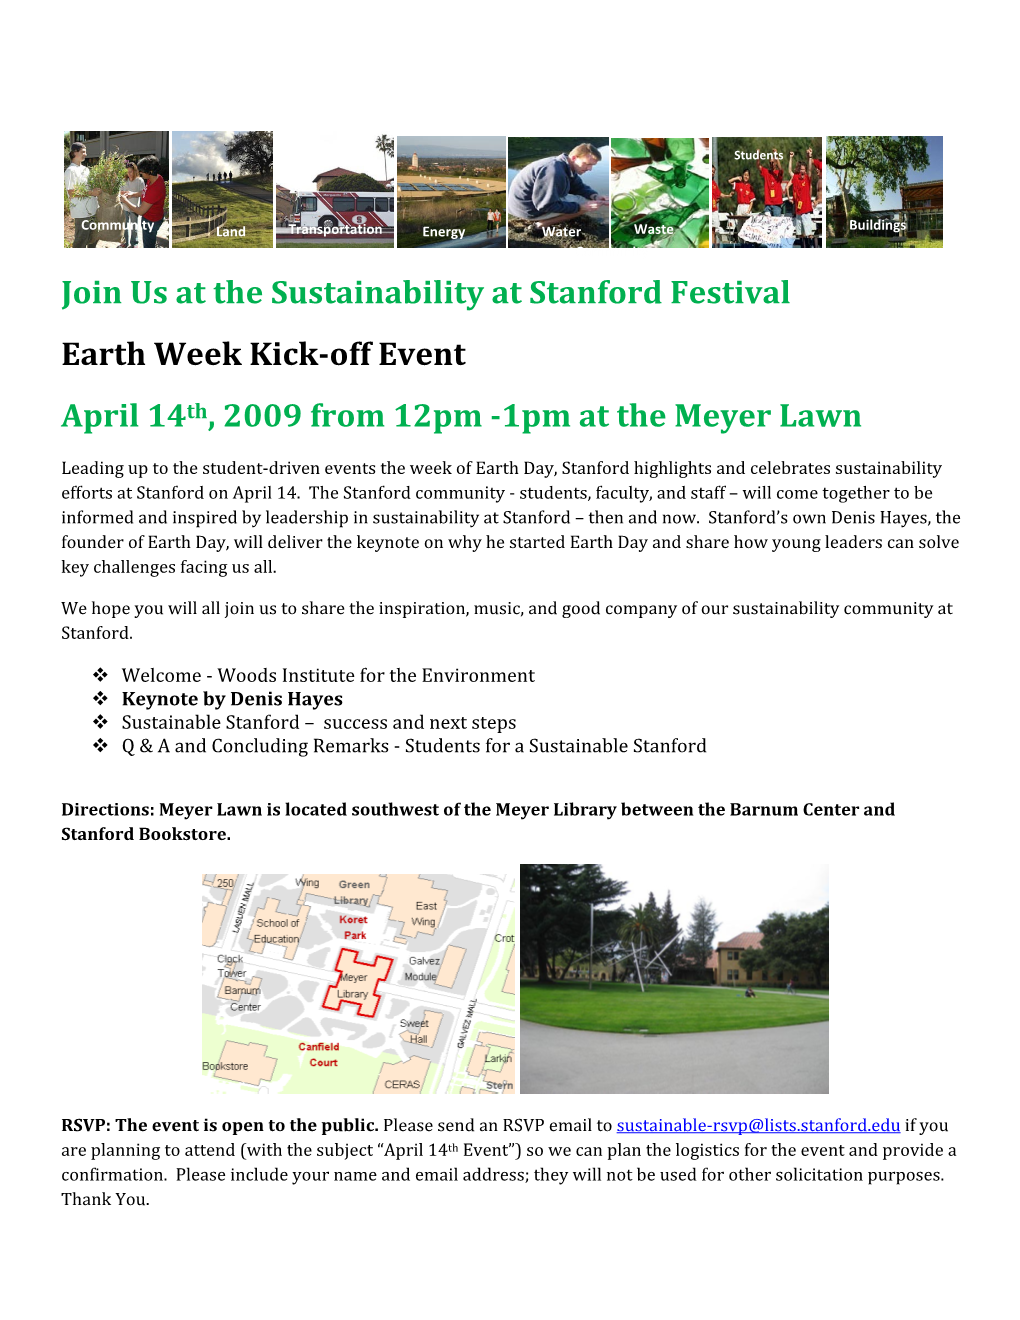 Join Us at the Sustainability at Stanford Festival Earth Week Kick-Off Event April 14Th, 2009 from 12Pm -1Pm at the Meyer Lawn